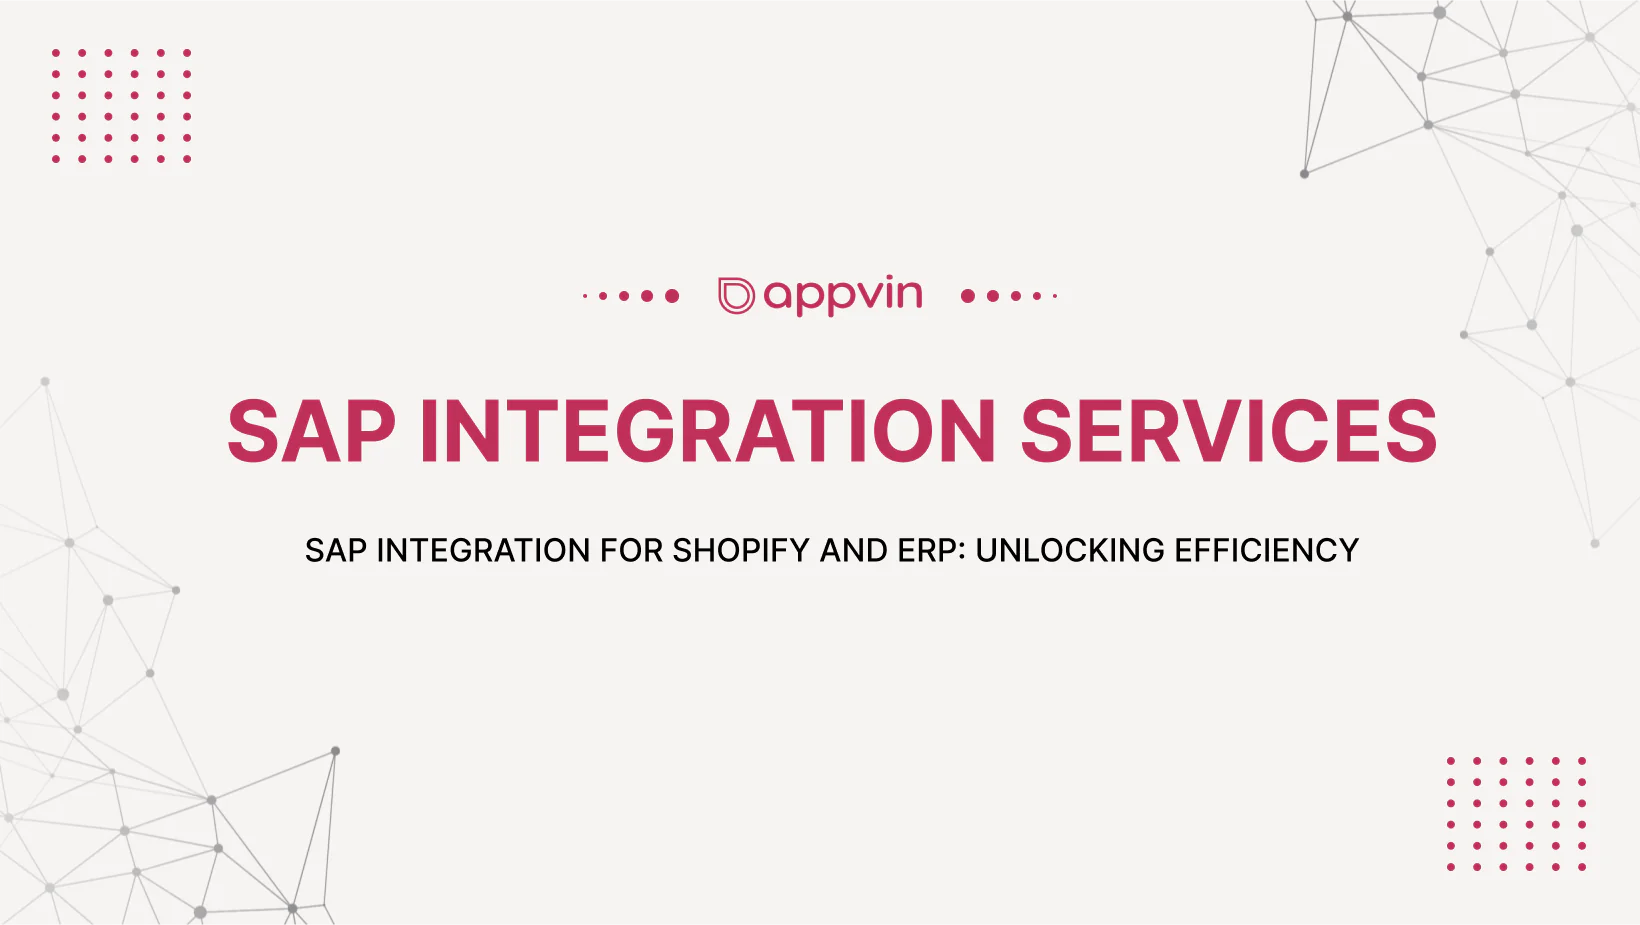 SAP Integration for Shopify and ERP: Unlocking Efficiency